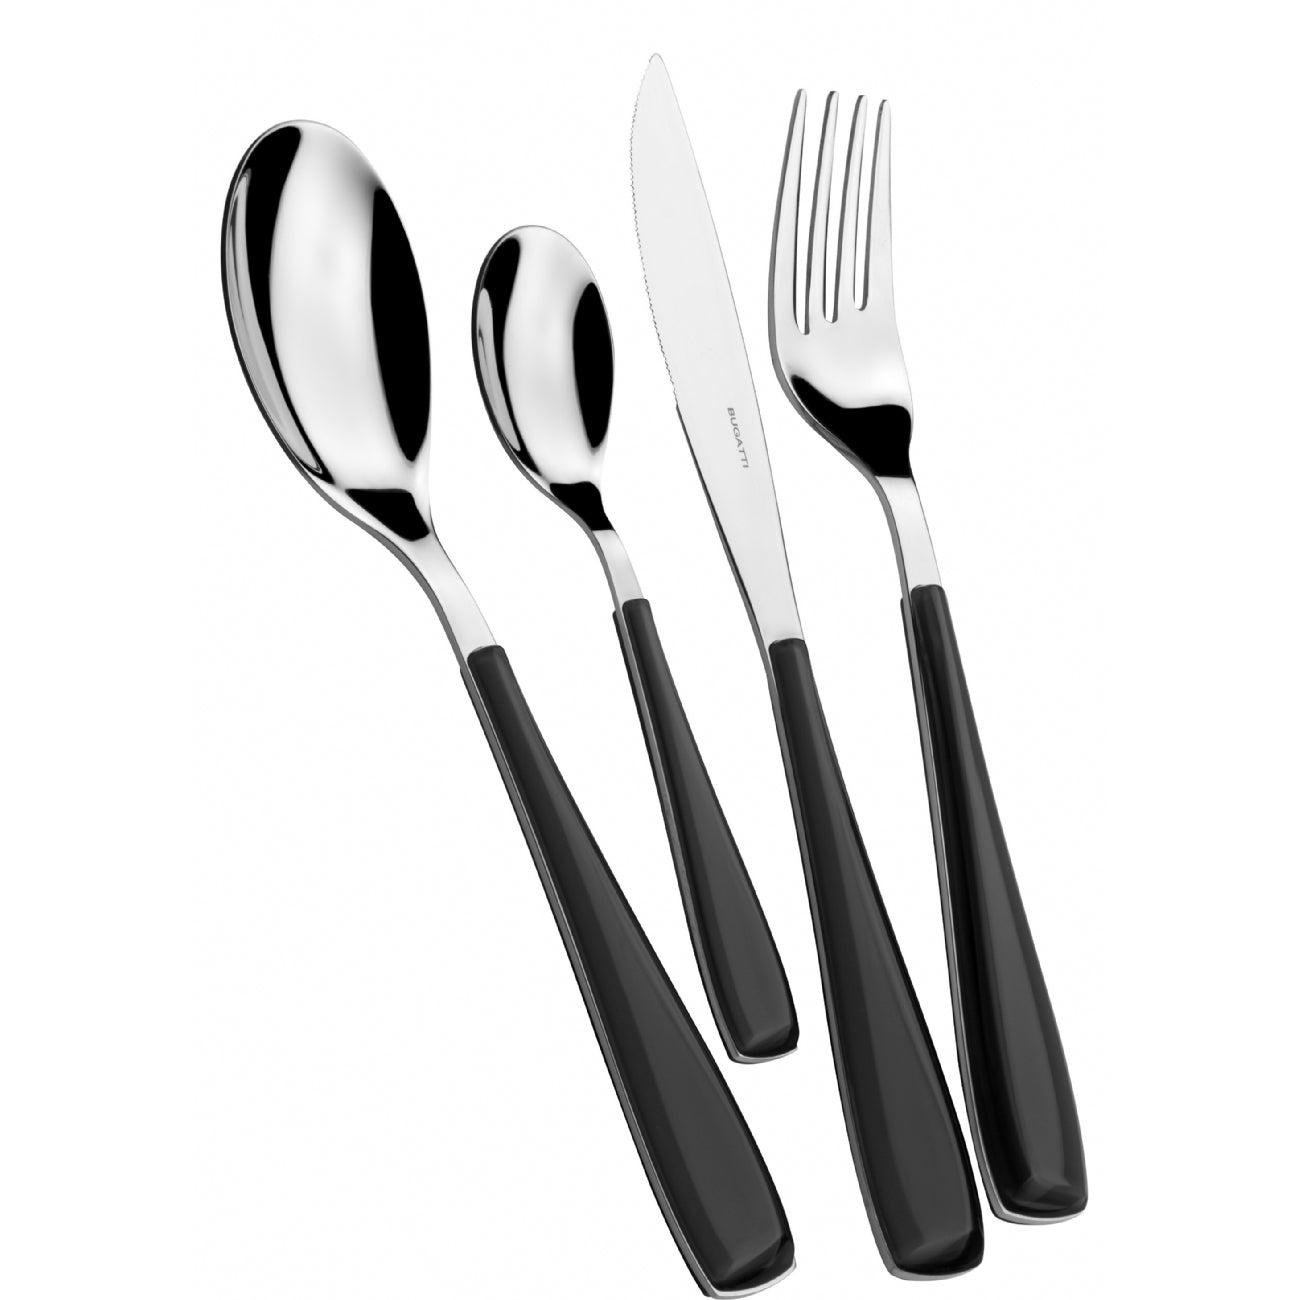 BUGATTI, Essenza, 24-Piece Cutlery Set in 18/10 Stainless Steel and Black Color Handle. Cutlery Set for 6 People Consisting of 6 Spoons, 6 Forks, 6 Knives and 6 Coffee Spoons